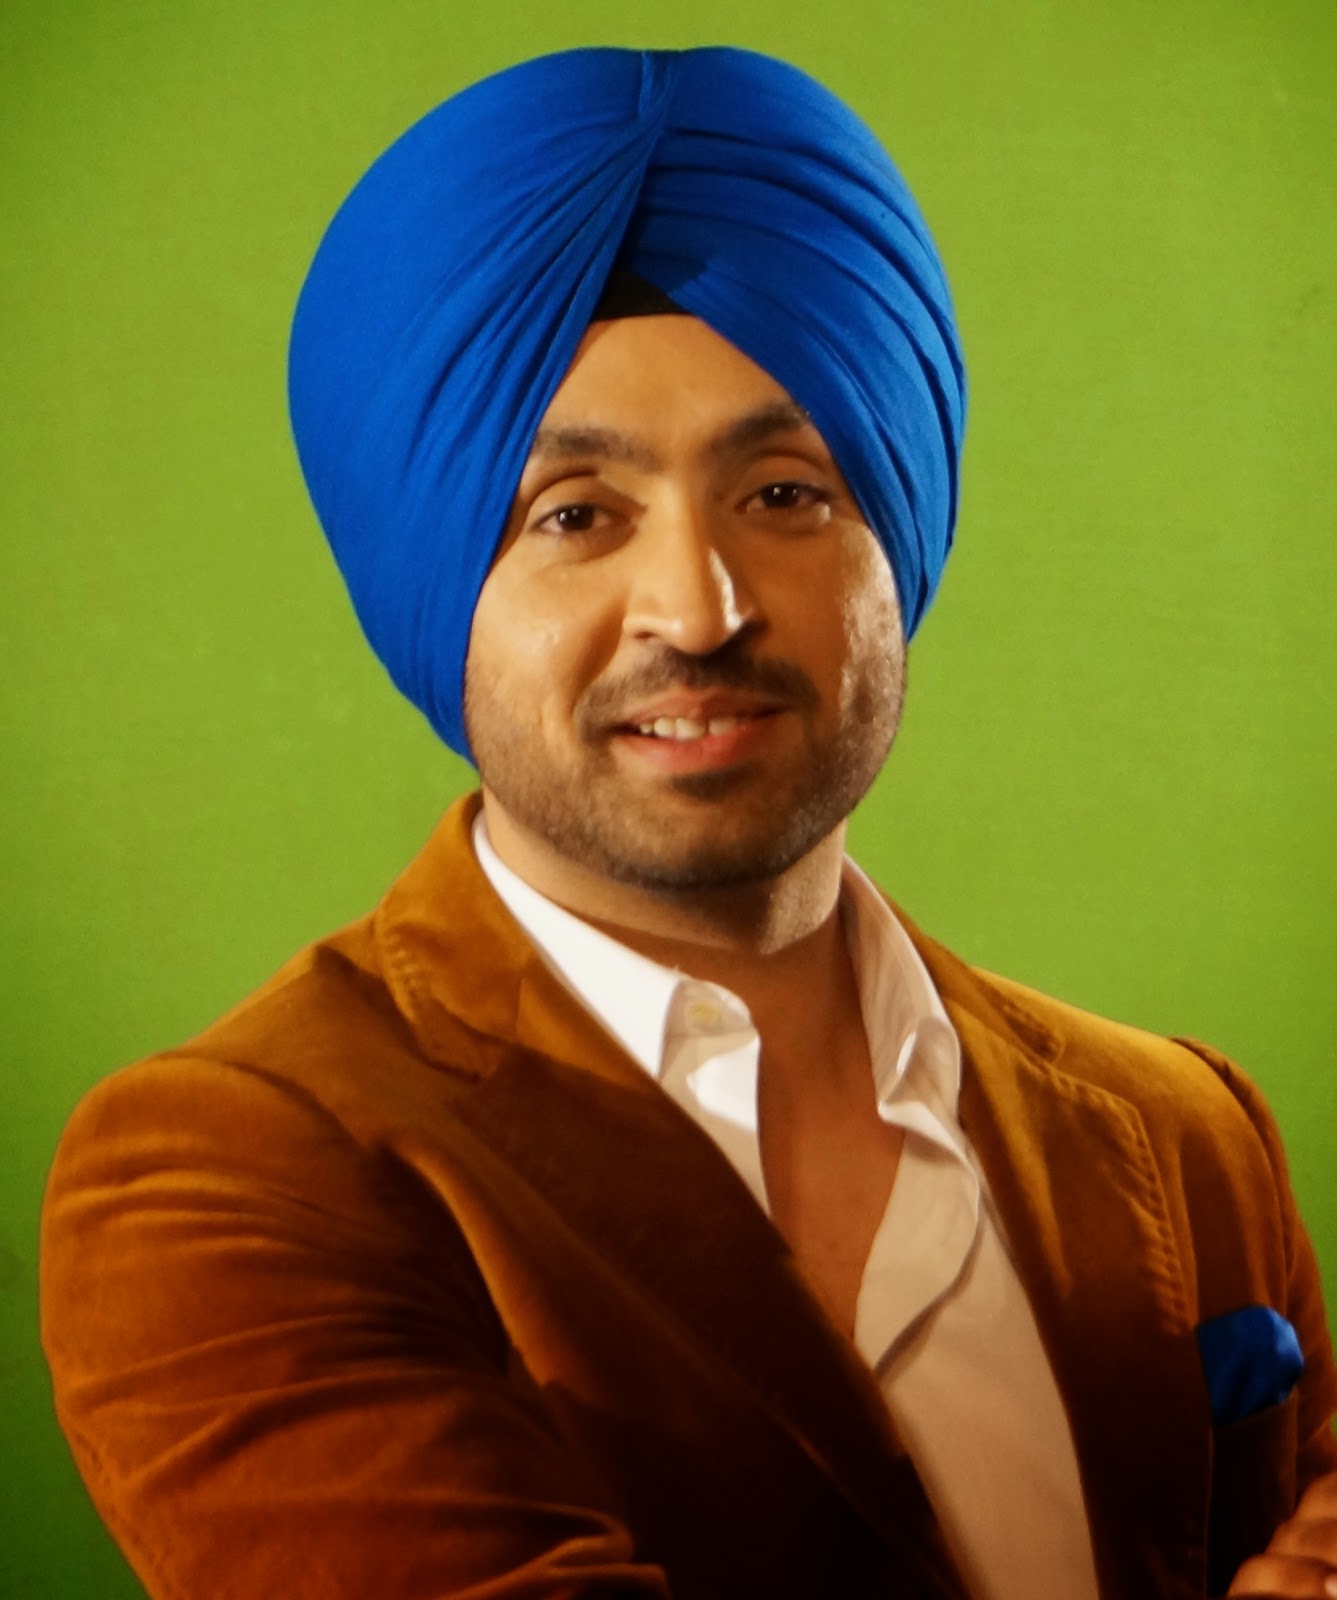 Sytlish Diljit Dosanjh in semi formal outfit during a shoot in Delhi